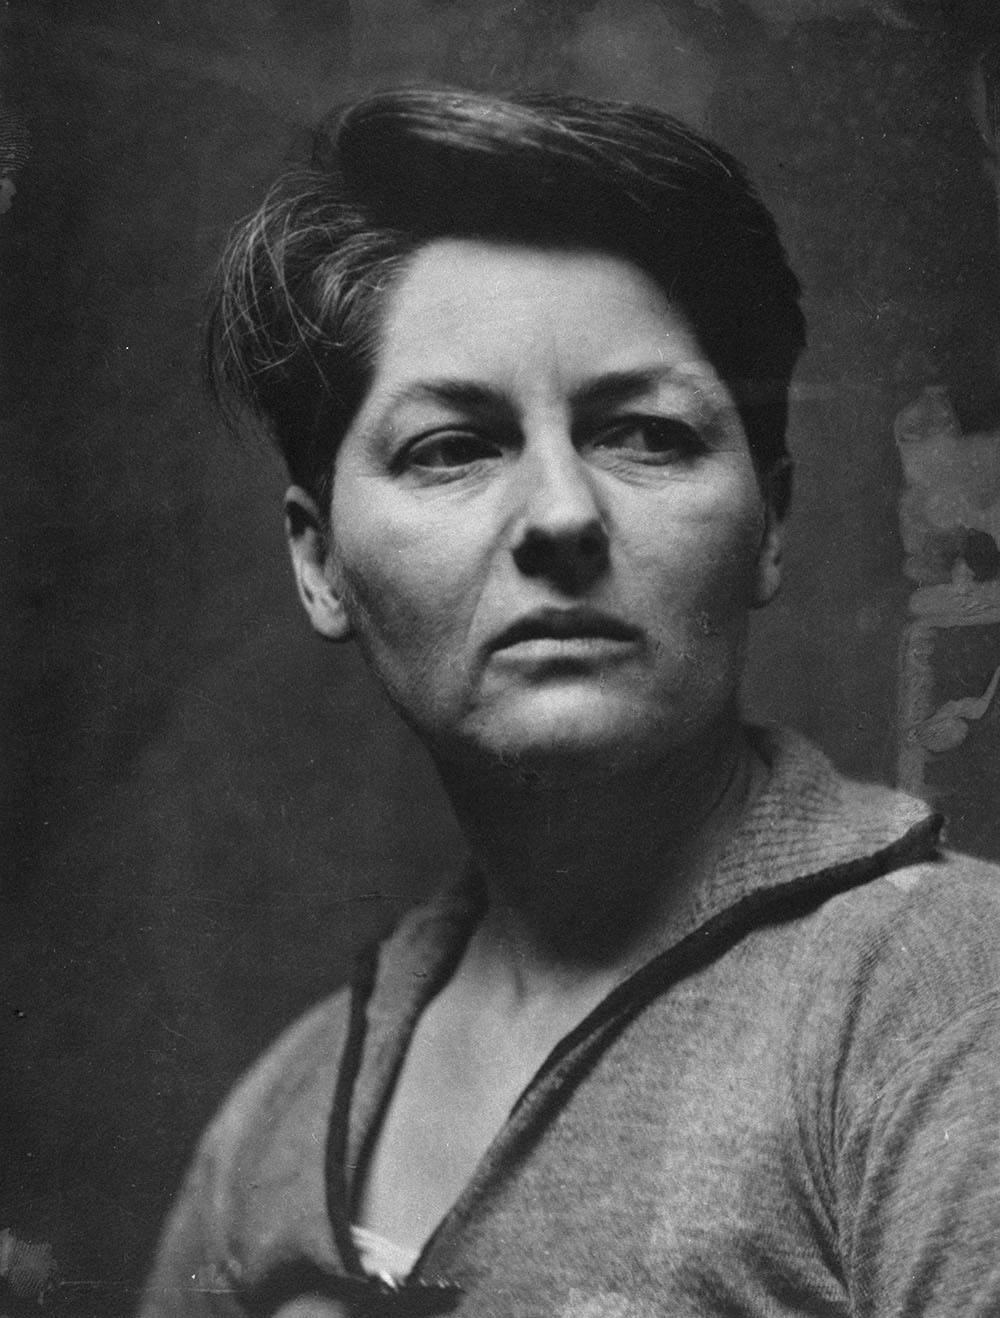 Florence Wyle, women sculptor